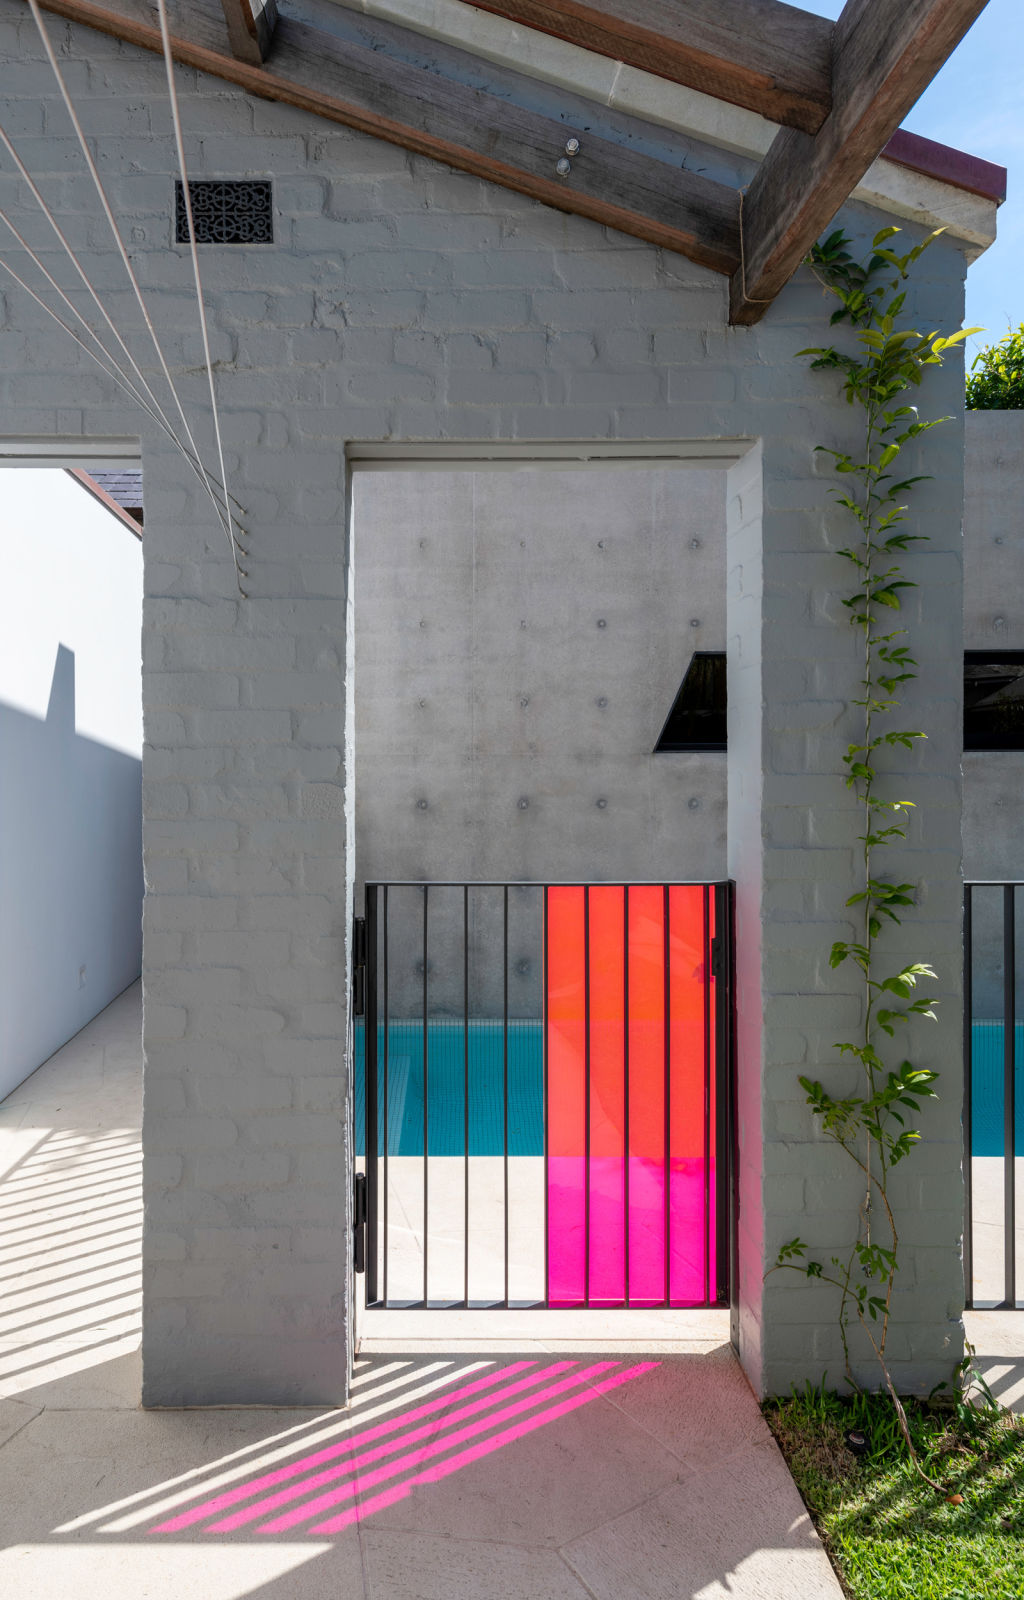 Playing with colours and concepts by the pool. Photo: Willem Rethmeier